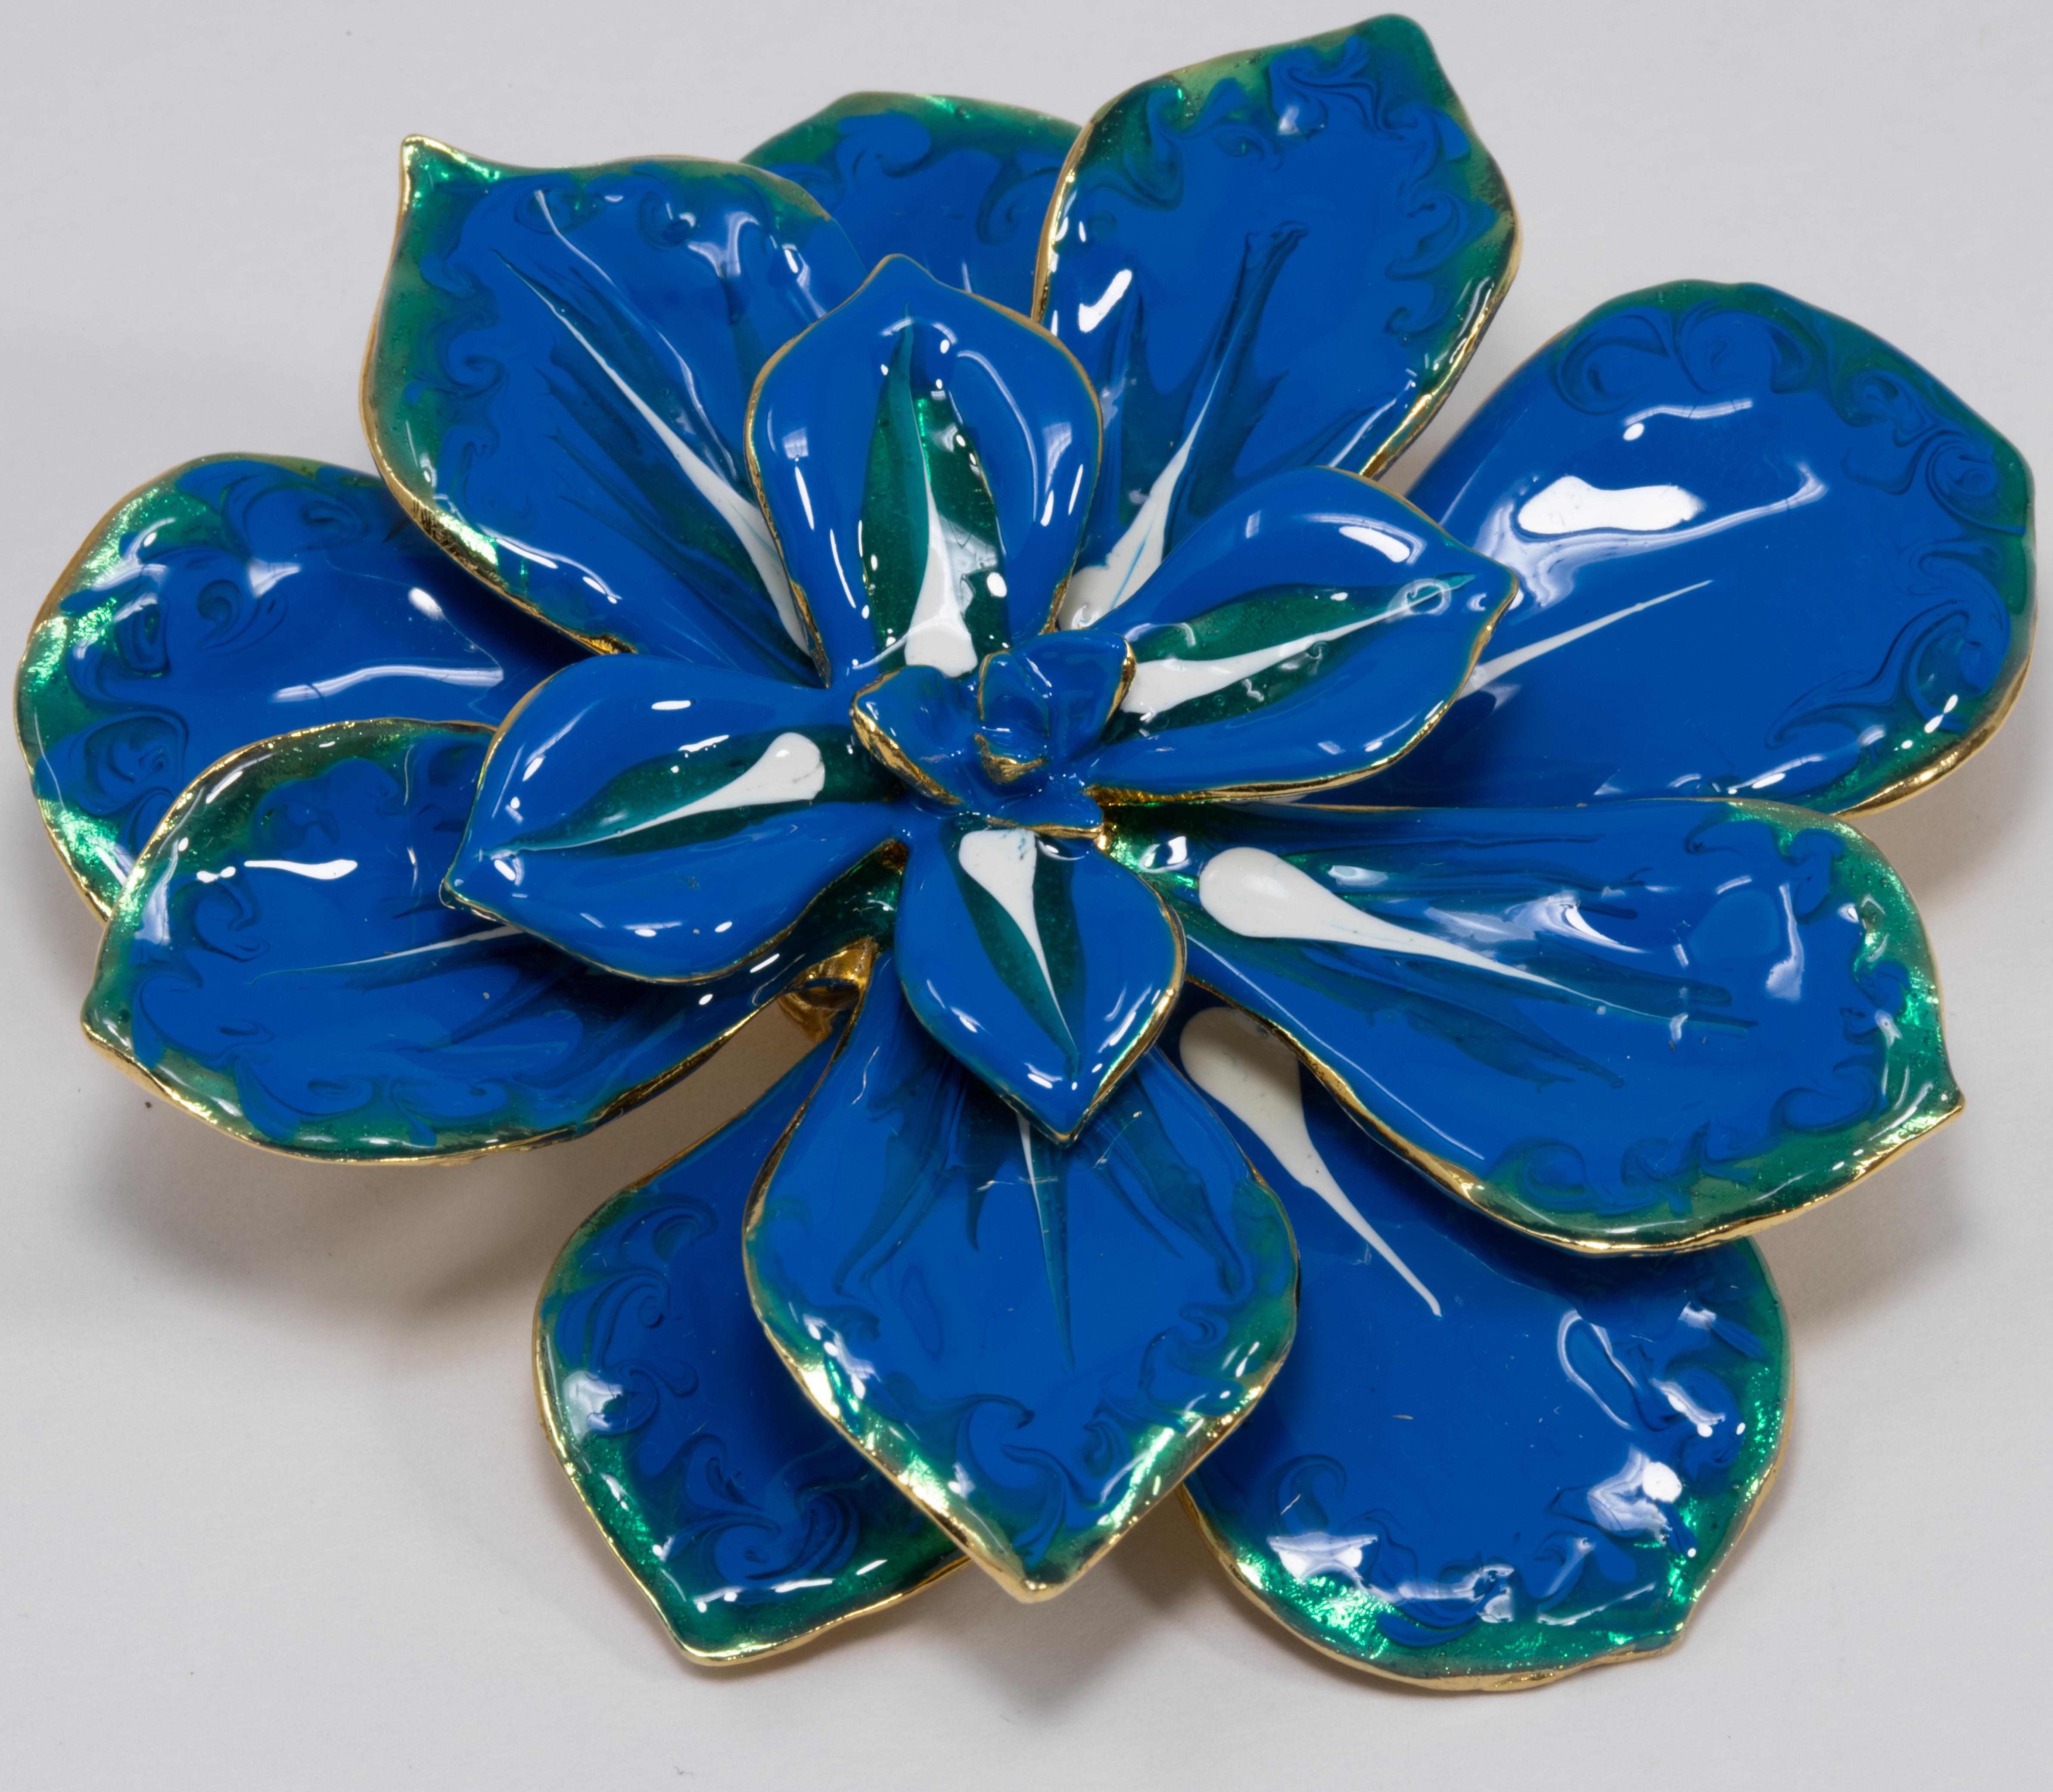 A blooming flower pin brooch by Kenneth Jay Lane! Vibrant blue, teal, and white painted enamel petals on a goldtone metal setting.

Hallmarks: Kenneth © Lane